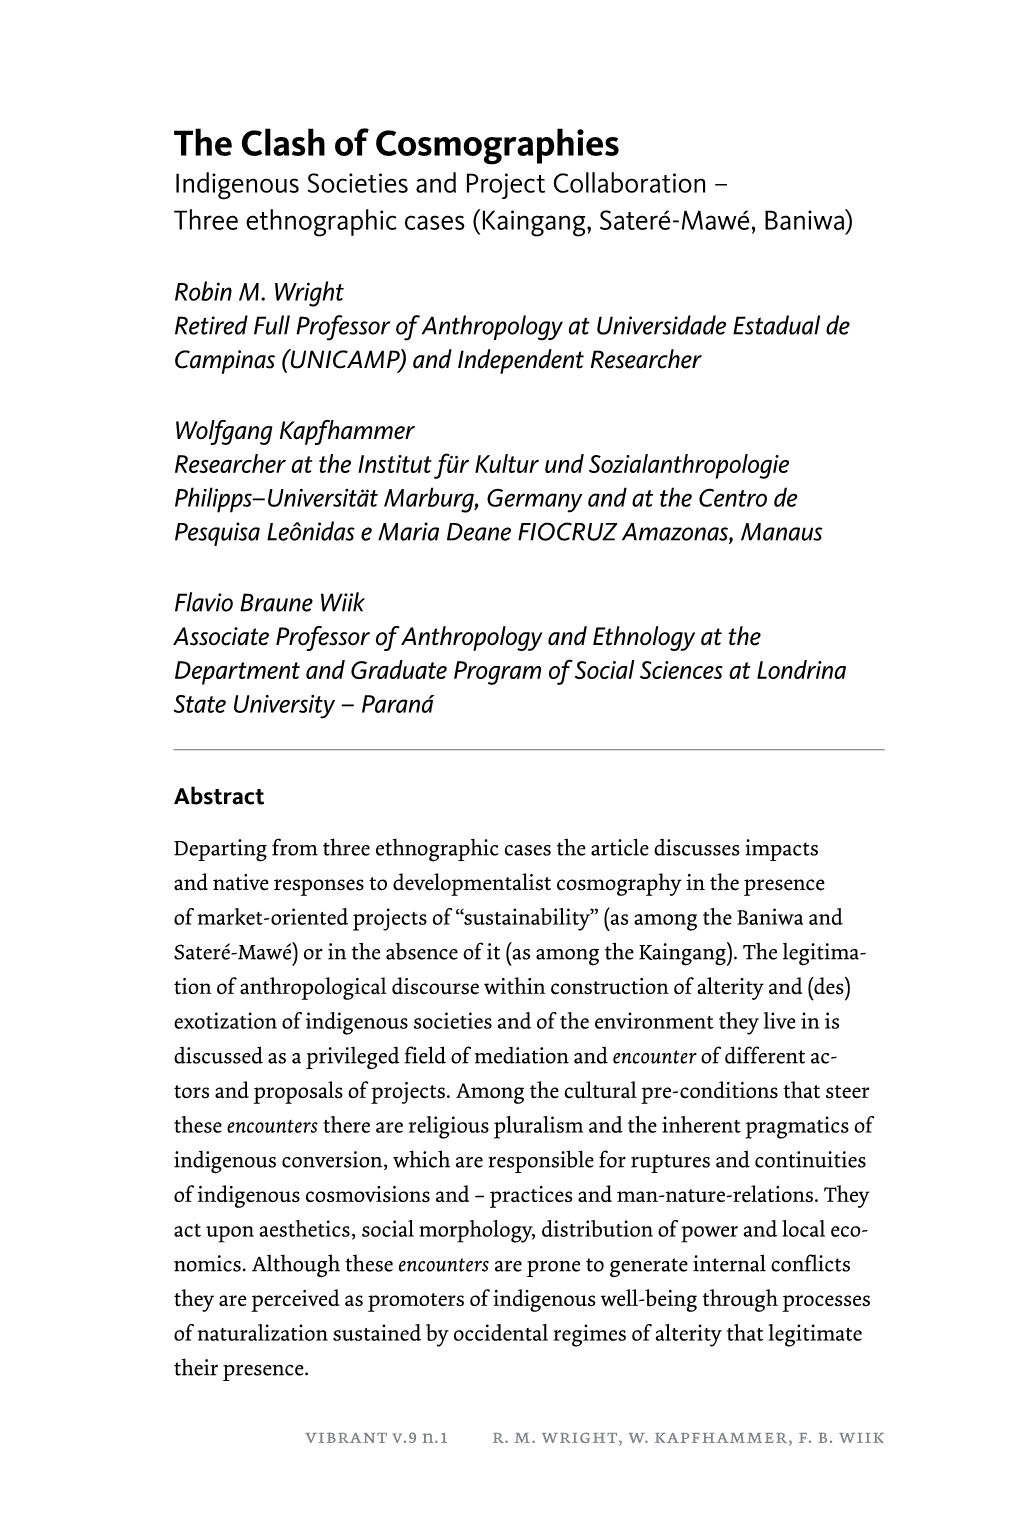 The Clash of Cosmographies Indigenous Societies and Project Collaboration – Three Ethnographic Cases (Kaingang, Sateré-Mawé, Baniwa)